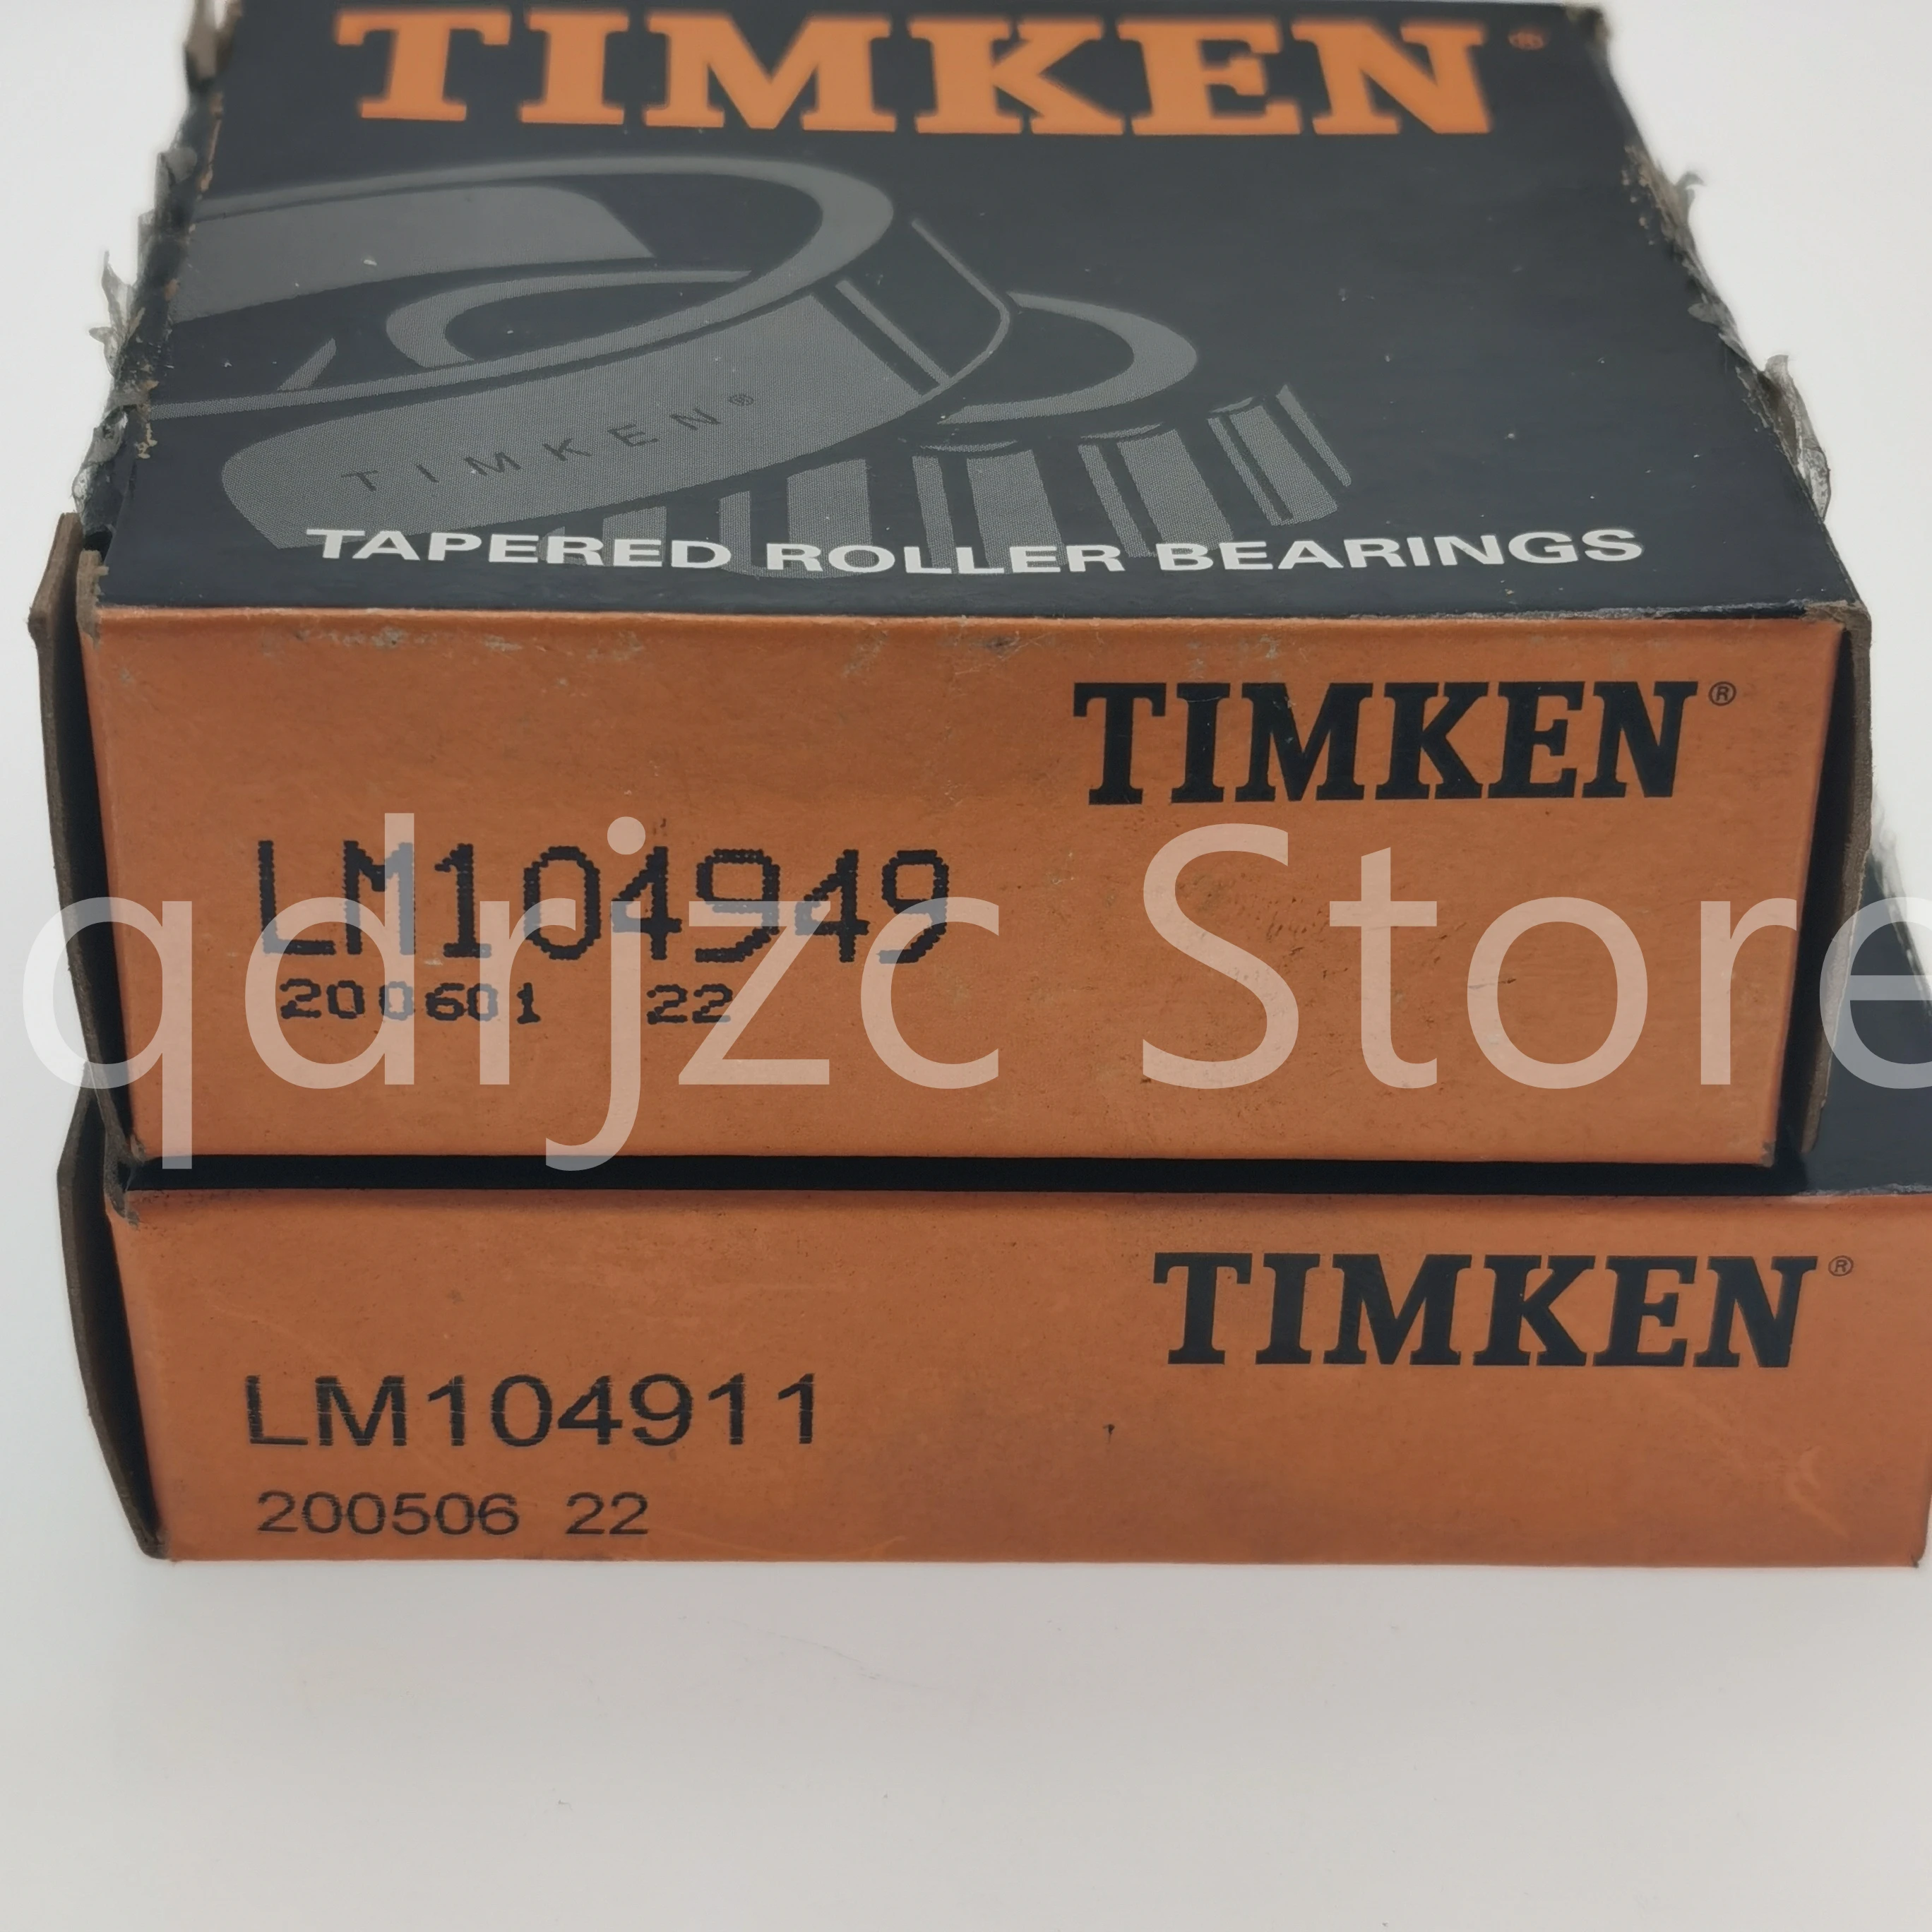 LM 104911 Timken LM104911 Tapered Roller Bearing Cup 